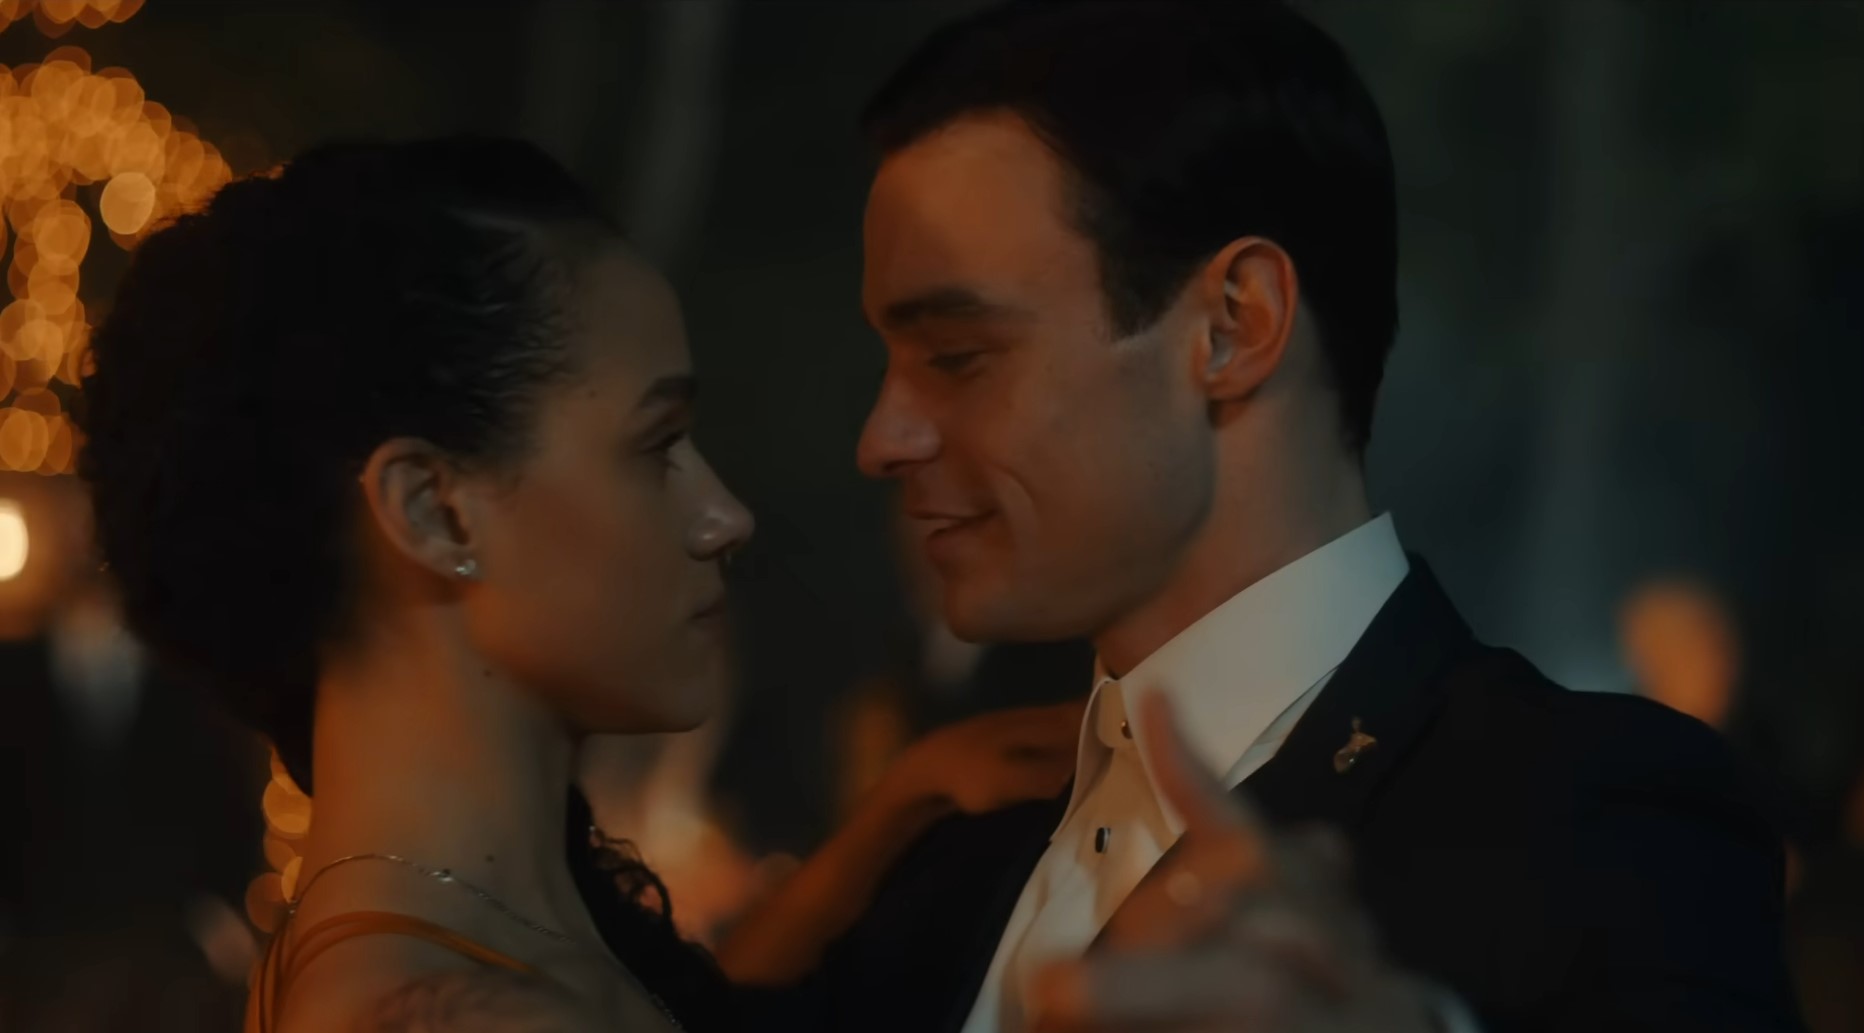 Nathalie Emmanuel and Thomas Doherty in The Invitation